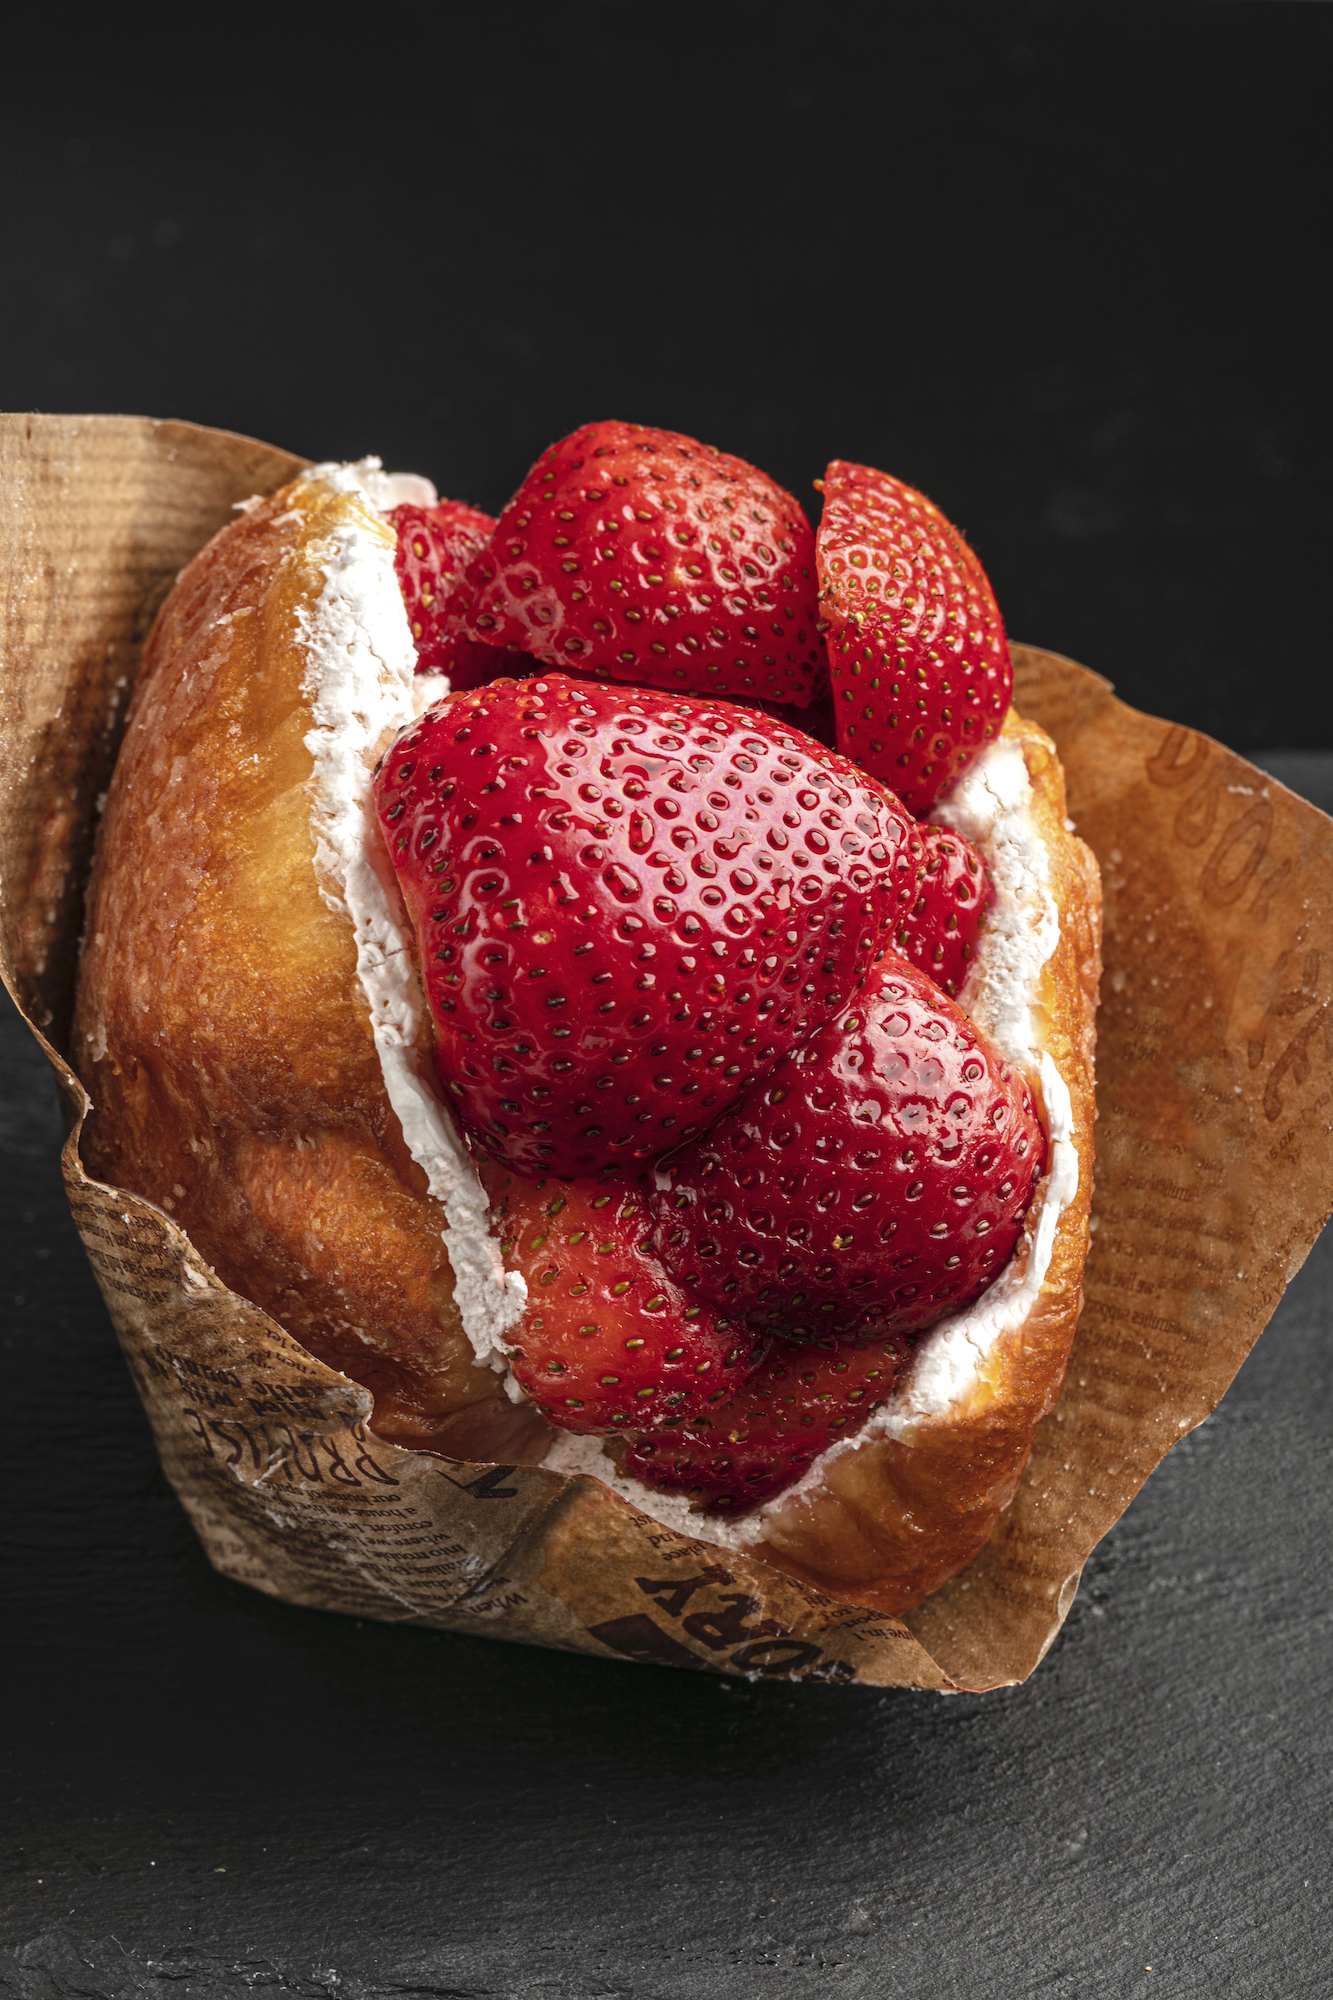 We Knead Bread's Strawberry Cream Donut, a glazed doughnut with whipped cream and fresh strawberries